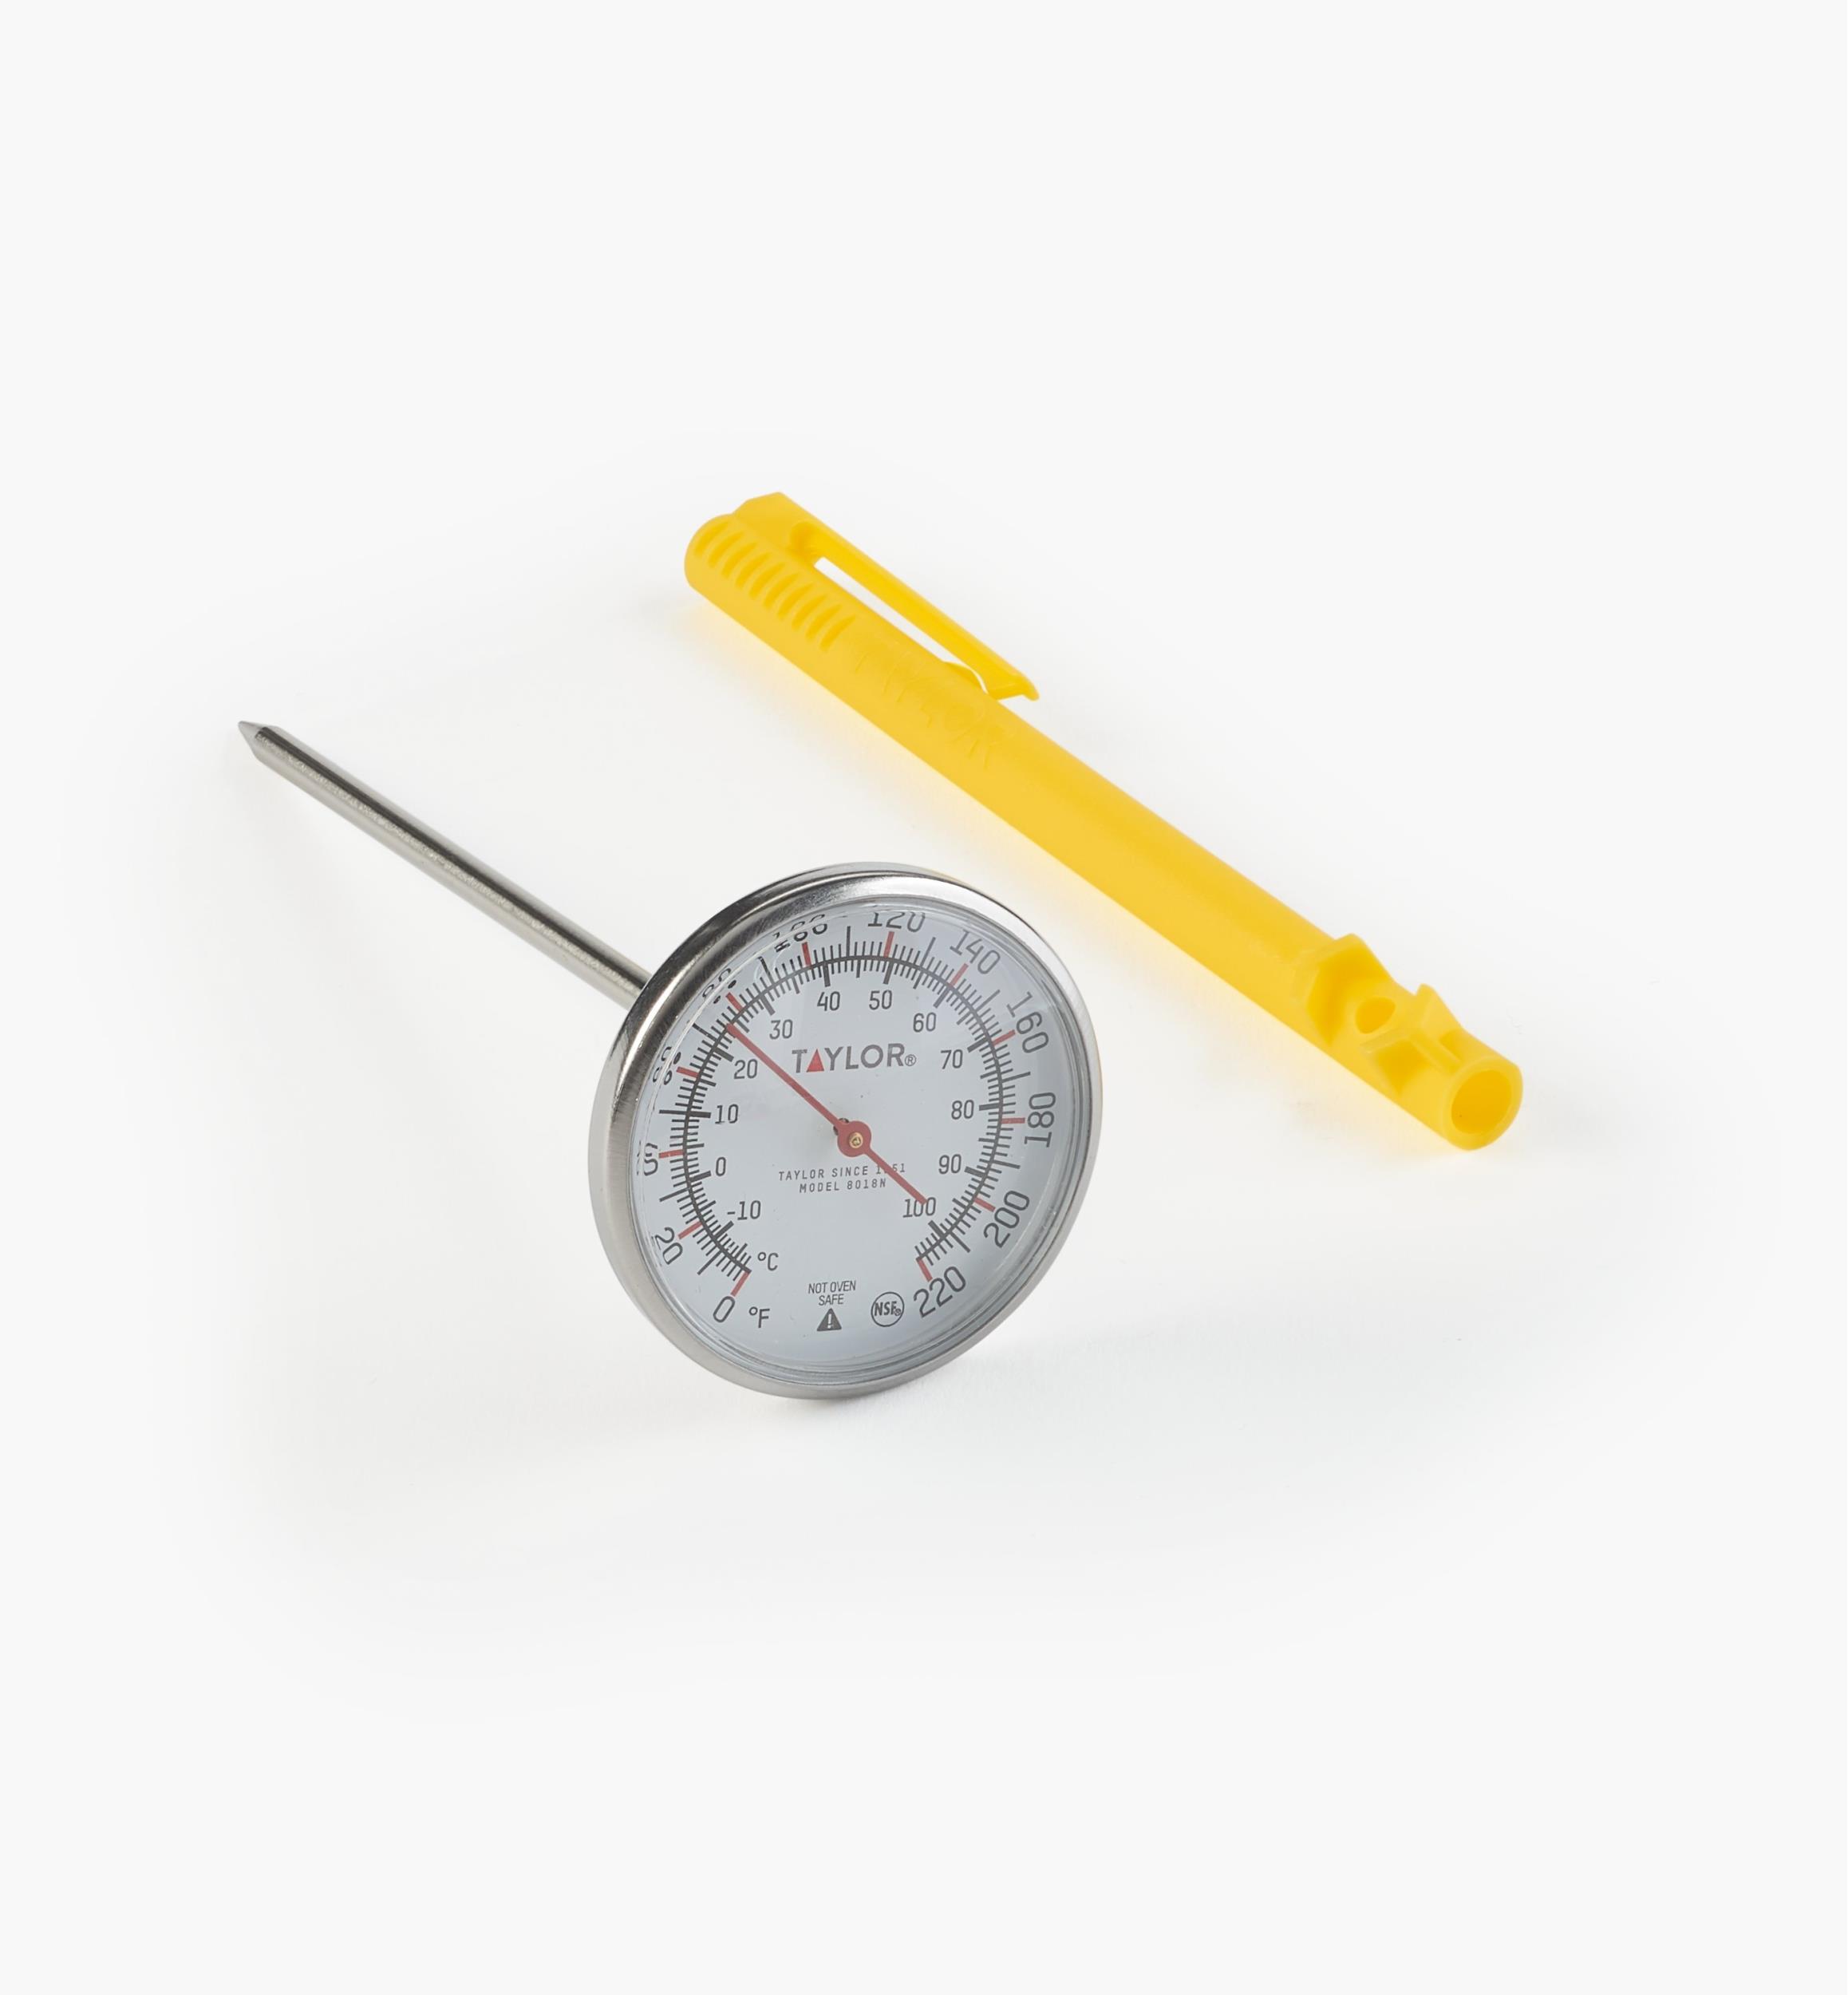 https://assets.leevalley.com/Size5/10023/FT102-instant-read-thermometer-f-15.jpg